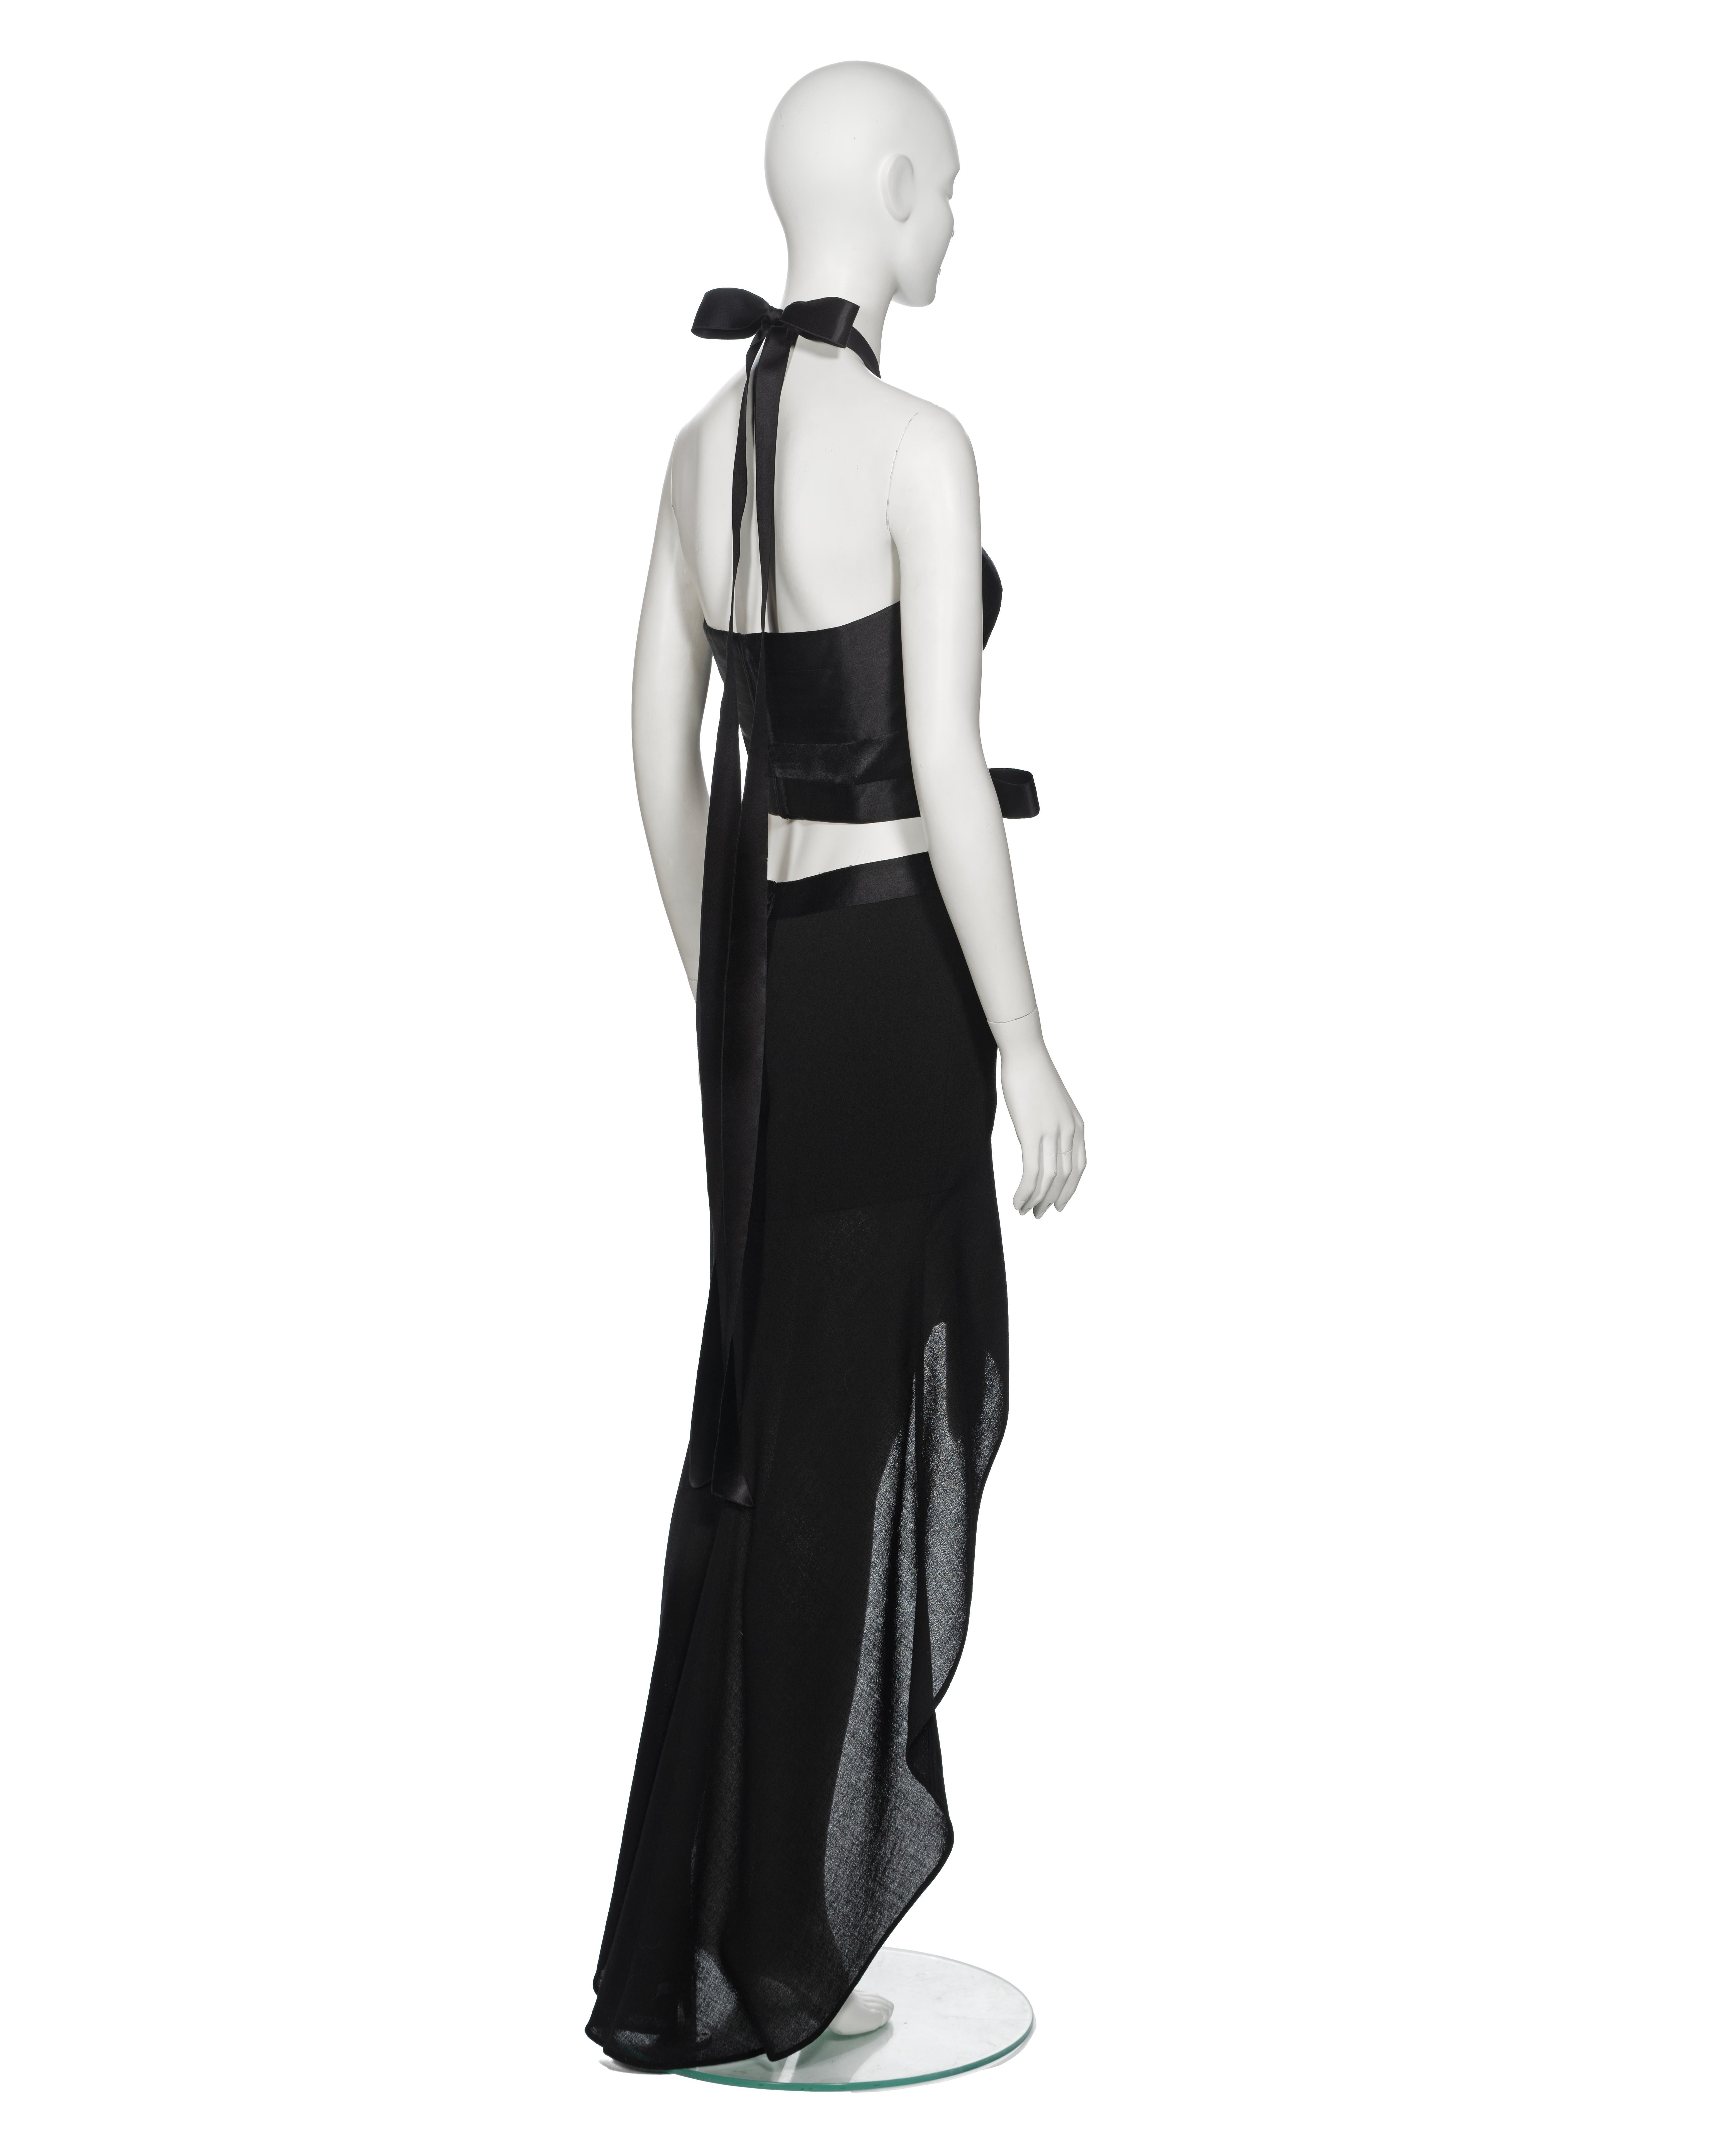 Chanel by Karl Lagerfeld Haute Couture Black Silk Evening Dress, fw 1994 For Sale 7